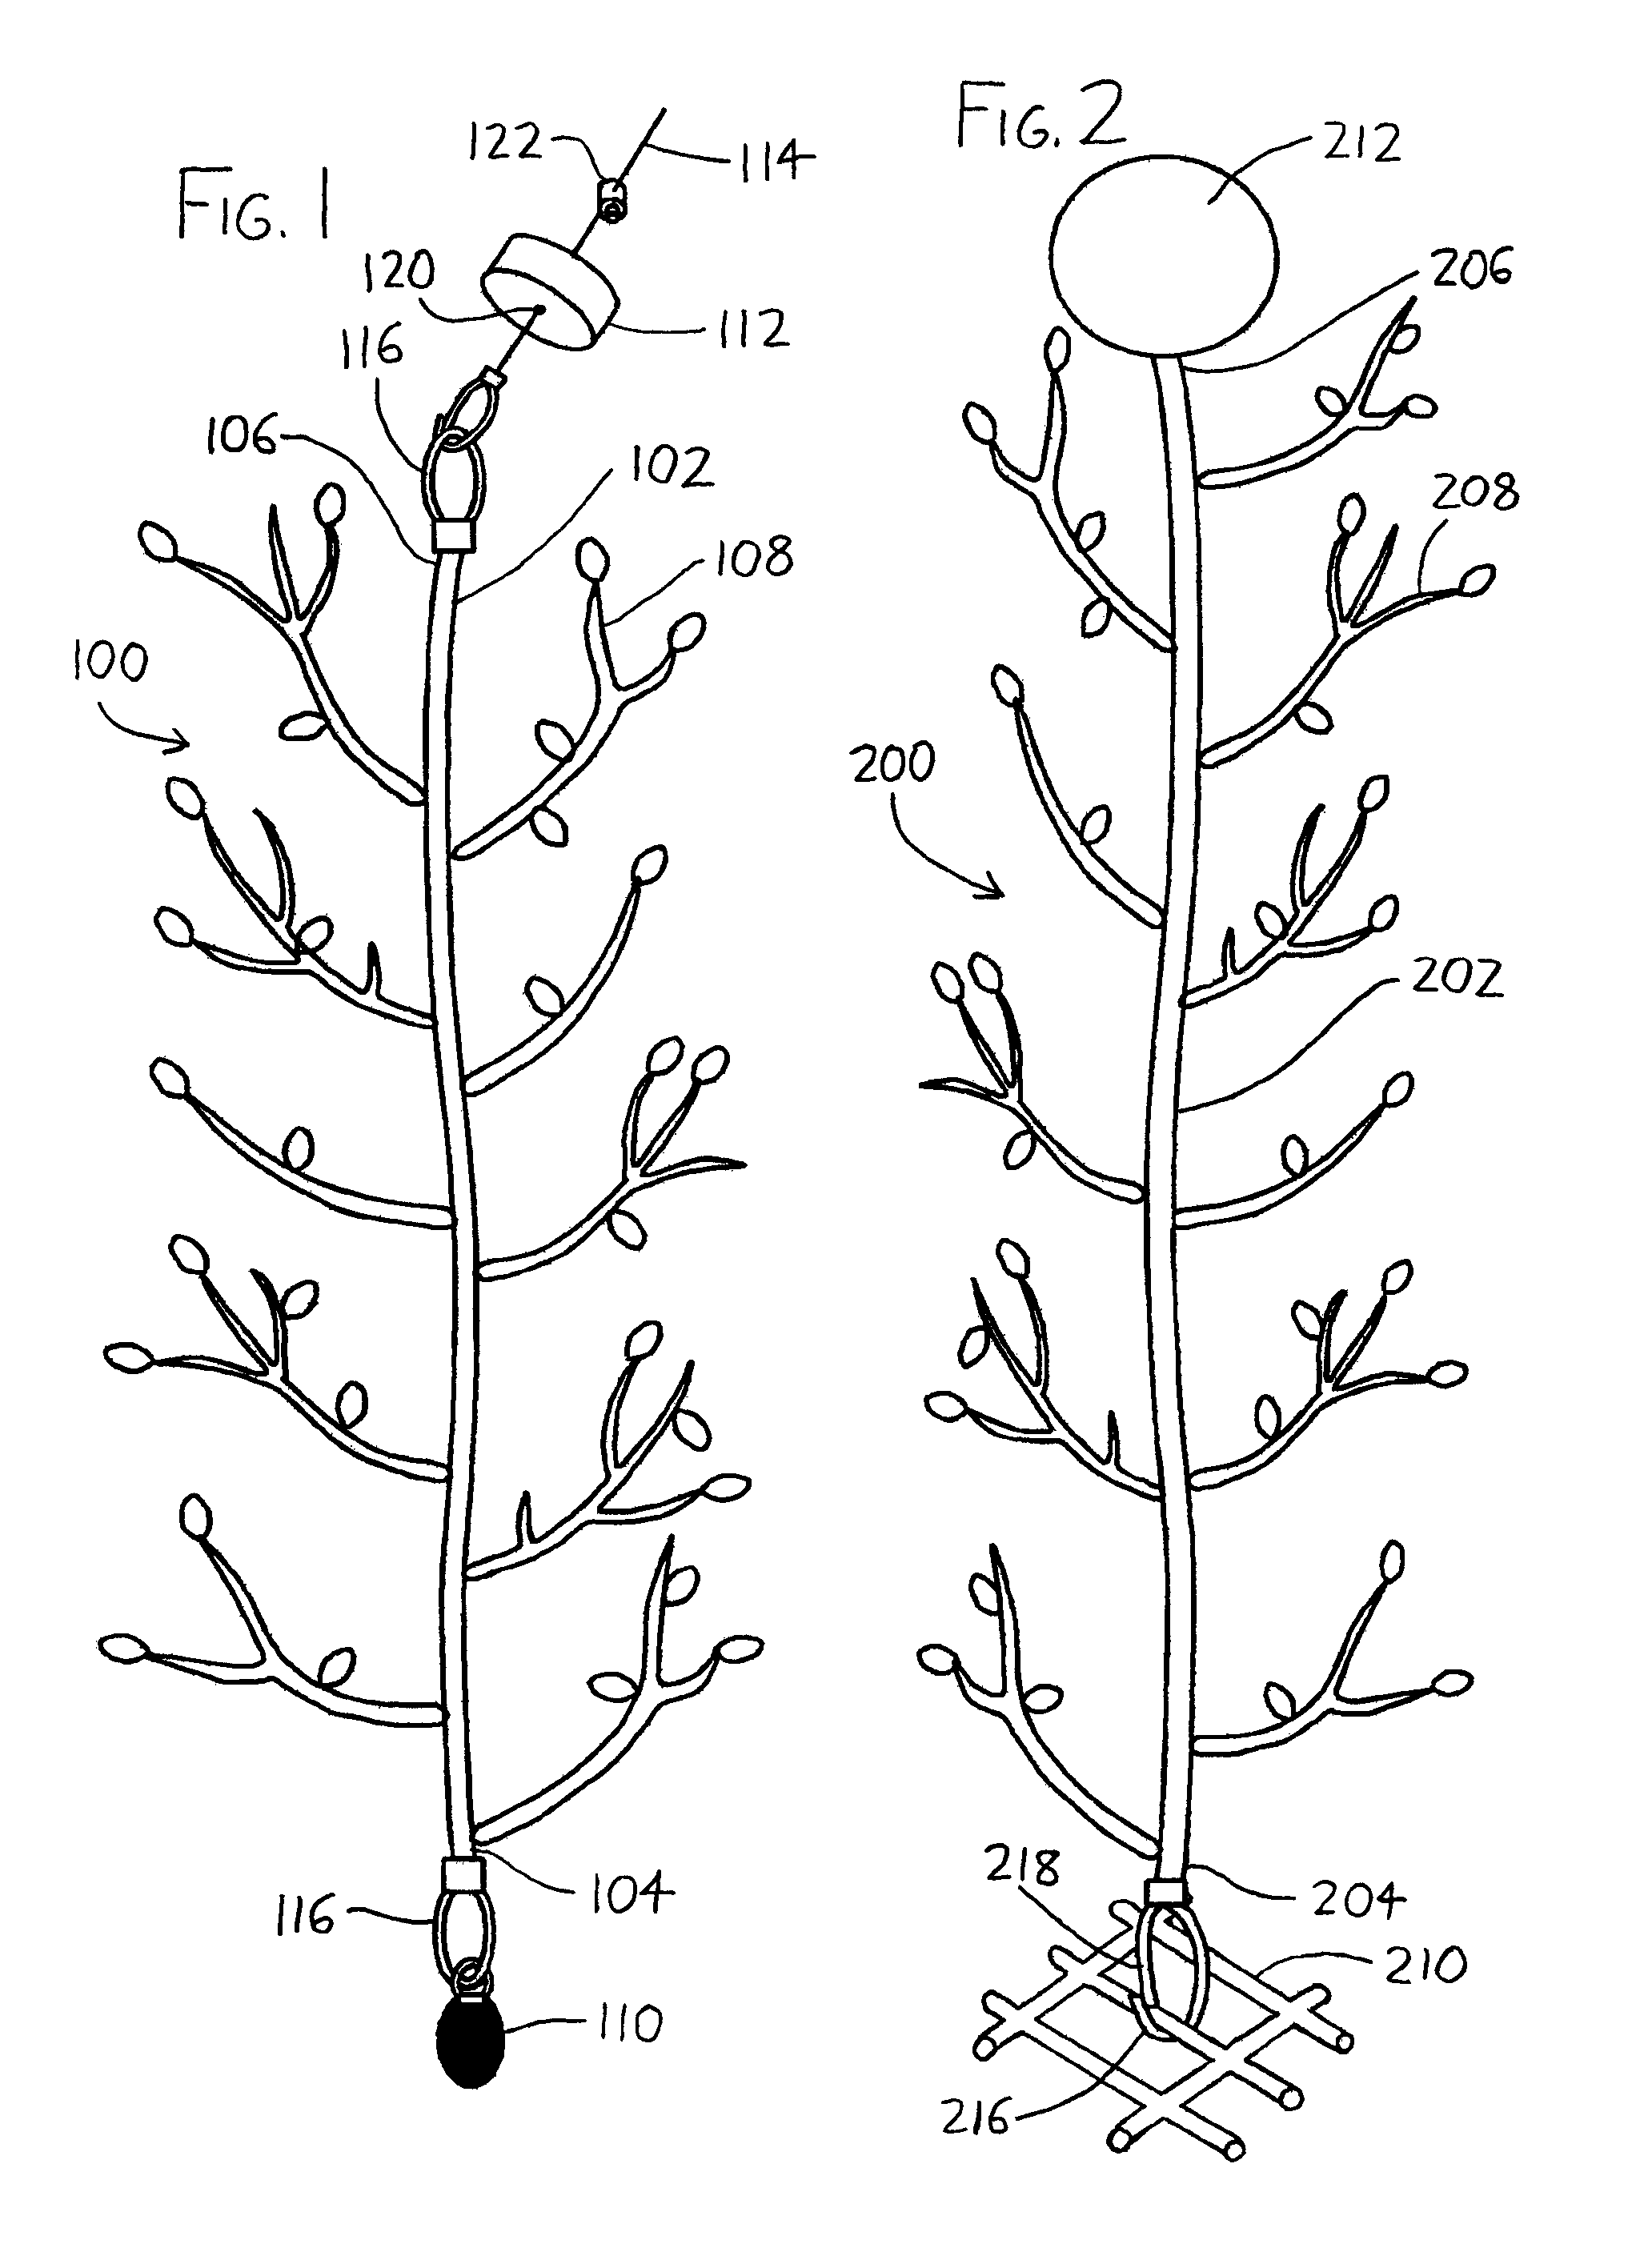 Artificial foliage for underwater camouflage and decoy purposes